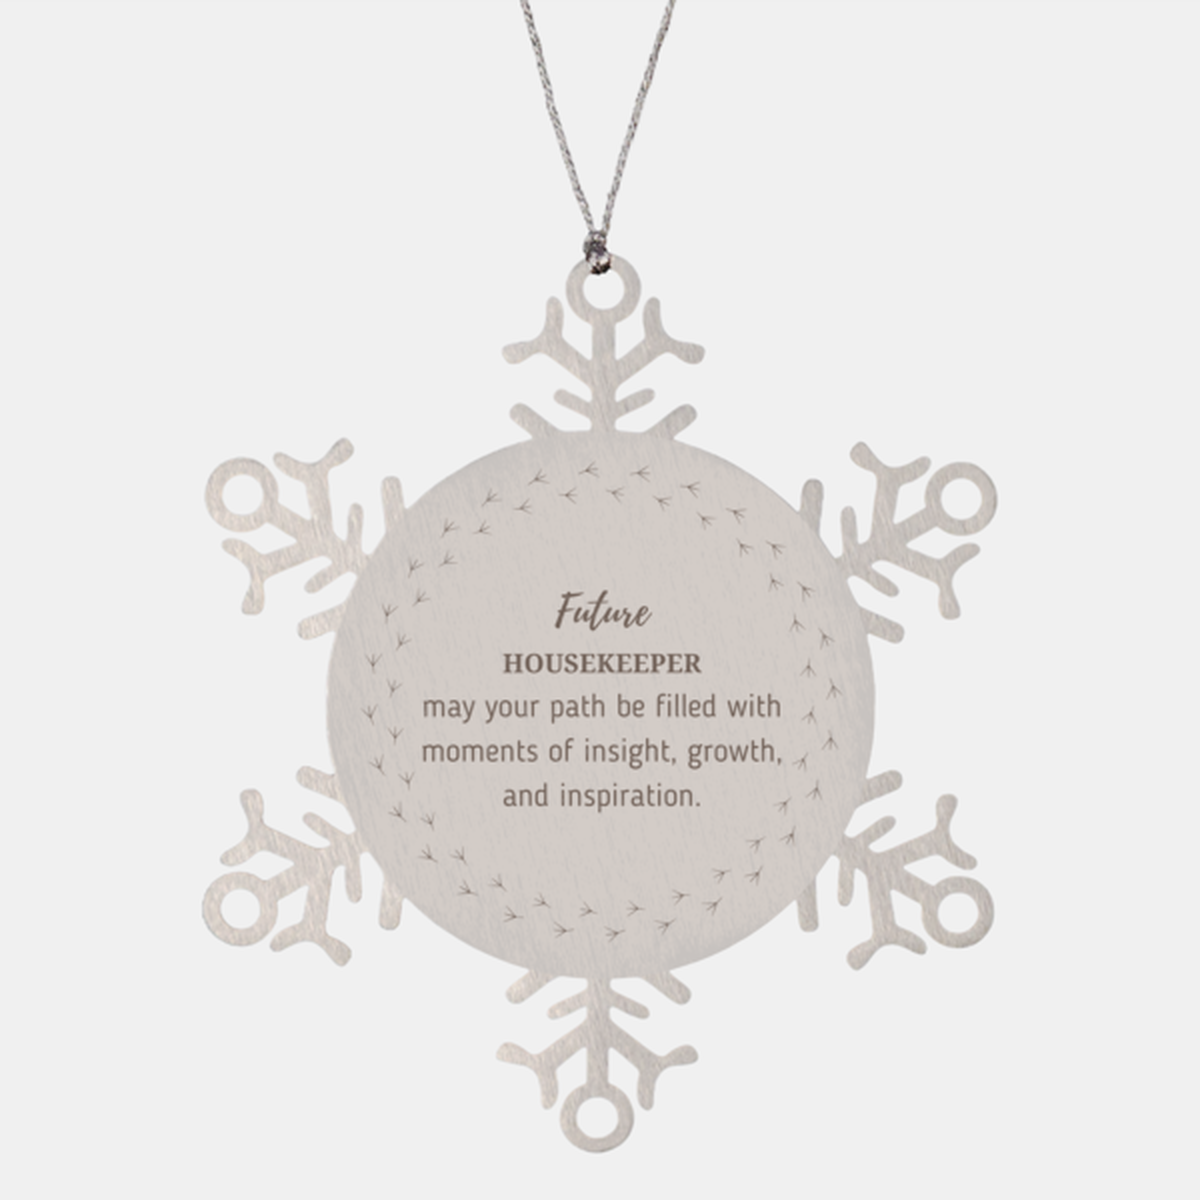 Future Housekeeper Gifts, May your path be filled with moments of insight, Graduation Gifts for New Housekeeper, Christmas Unique Snowflake Ornament For Men, Women, Friends